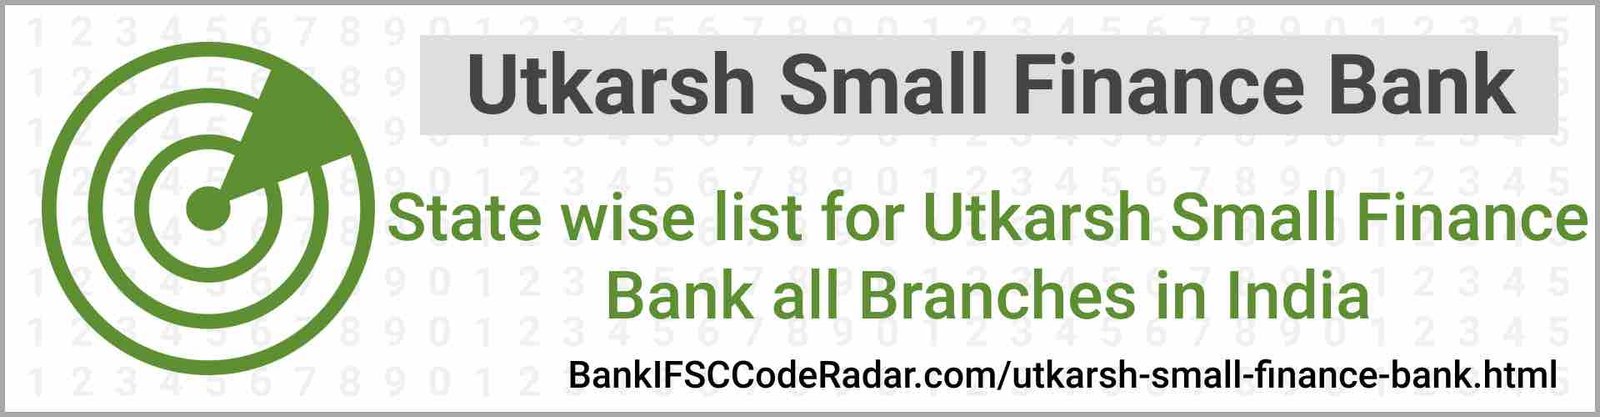 Utkarsh Small Finance Bank All Branches India